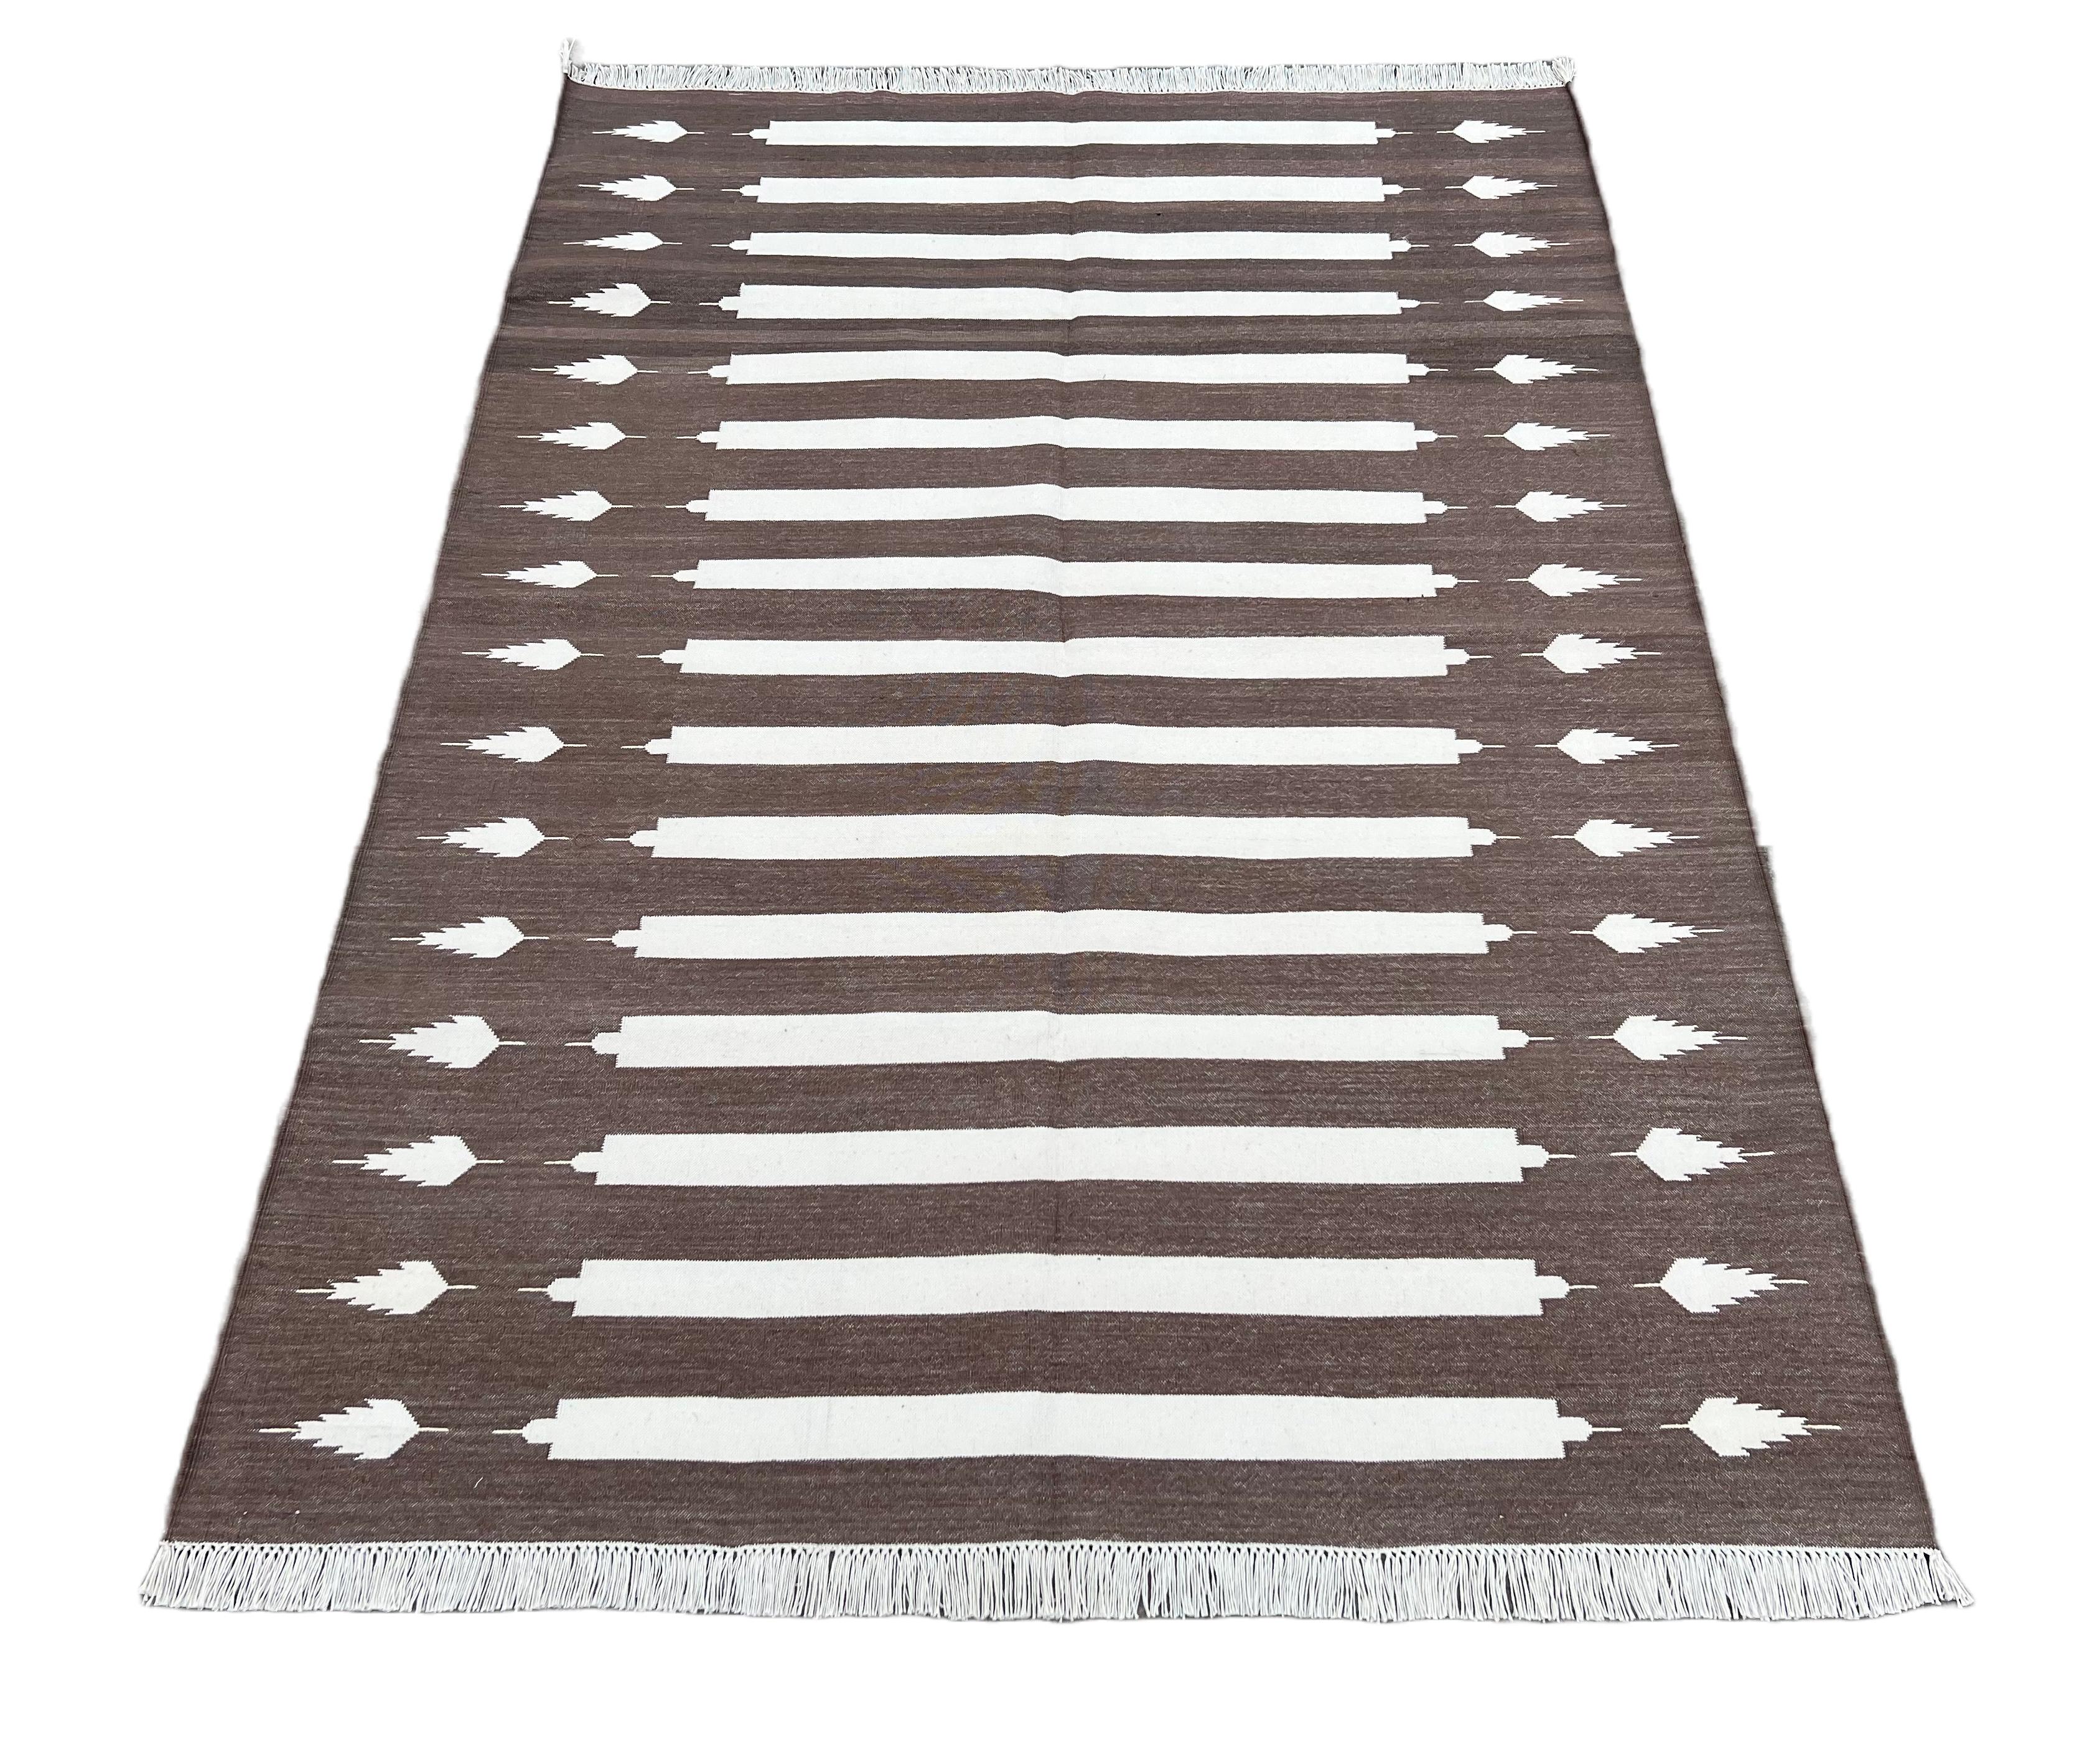 Hand-Woven Handmade Cotton Area Flat Weave Rug, Brown And White Striped Indian Dhurrie Rug For Sale